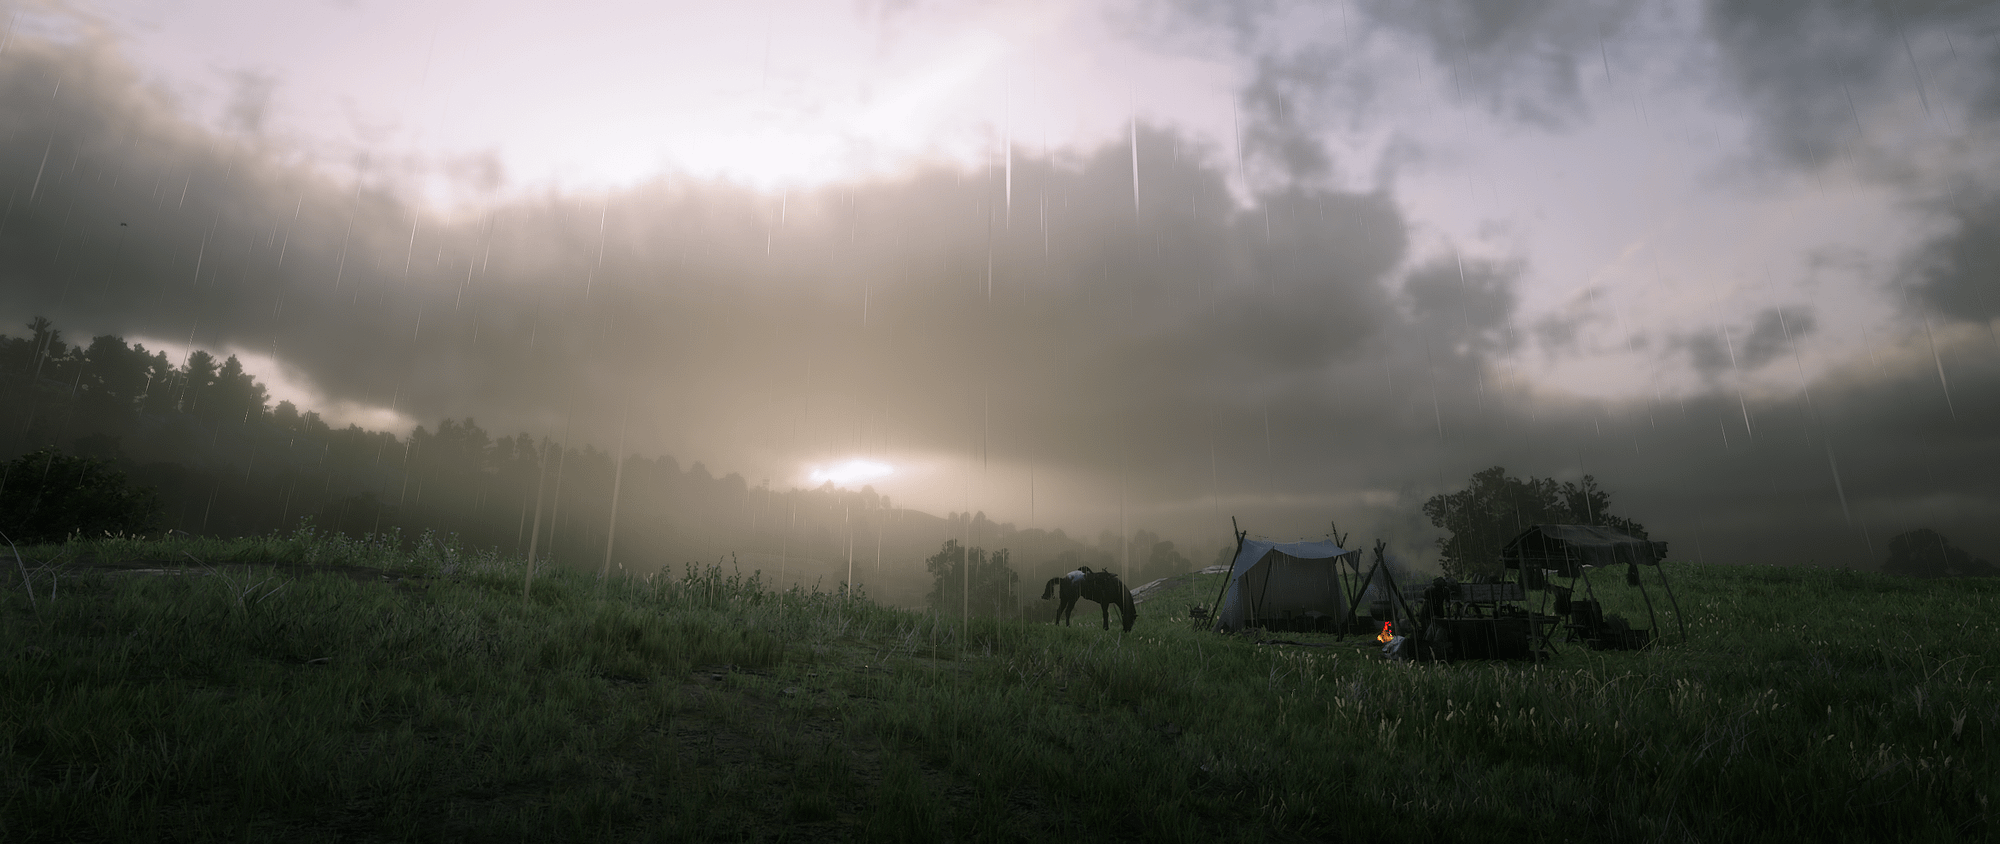 Review: Red Dead Redemption 2 on PC is the definitive version